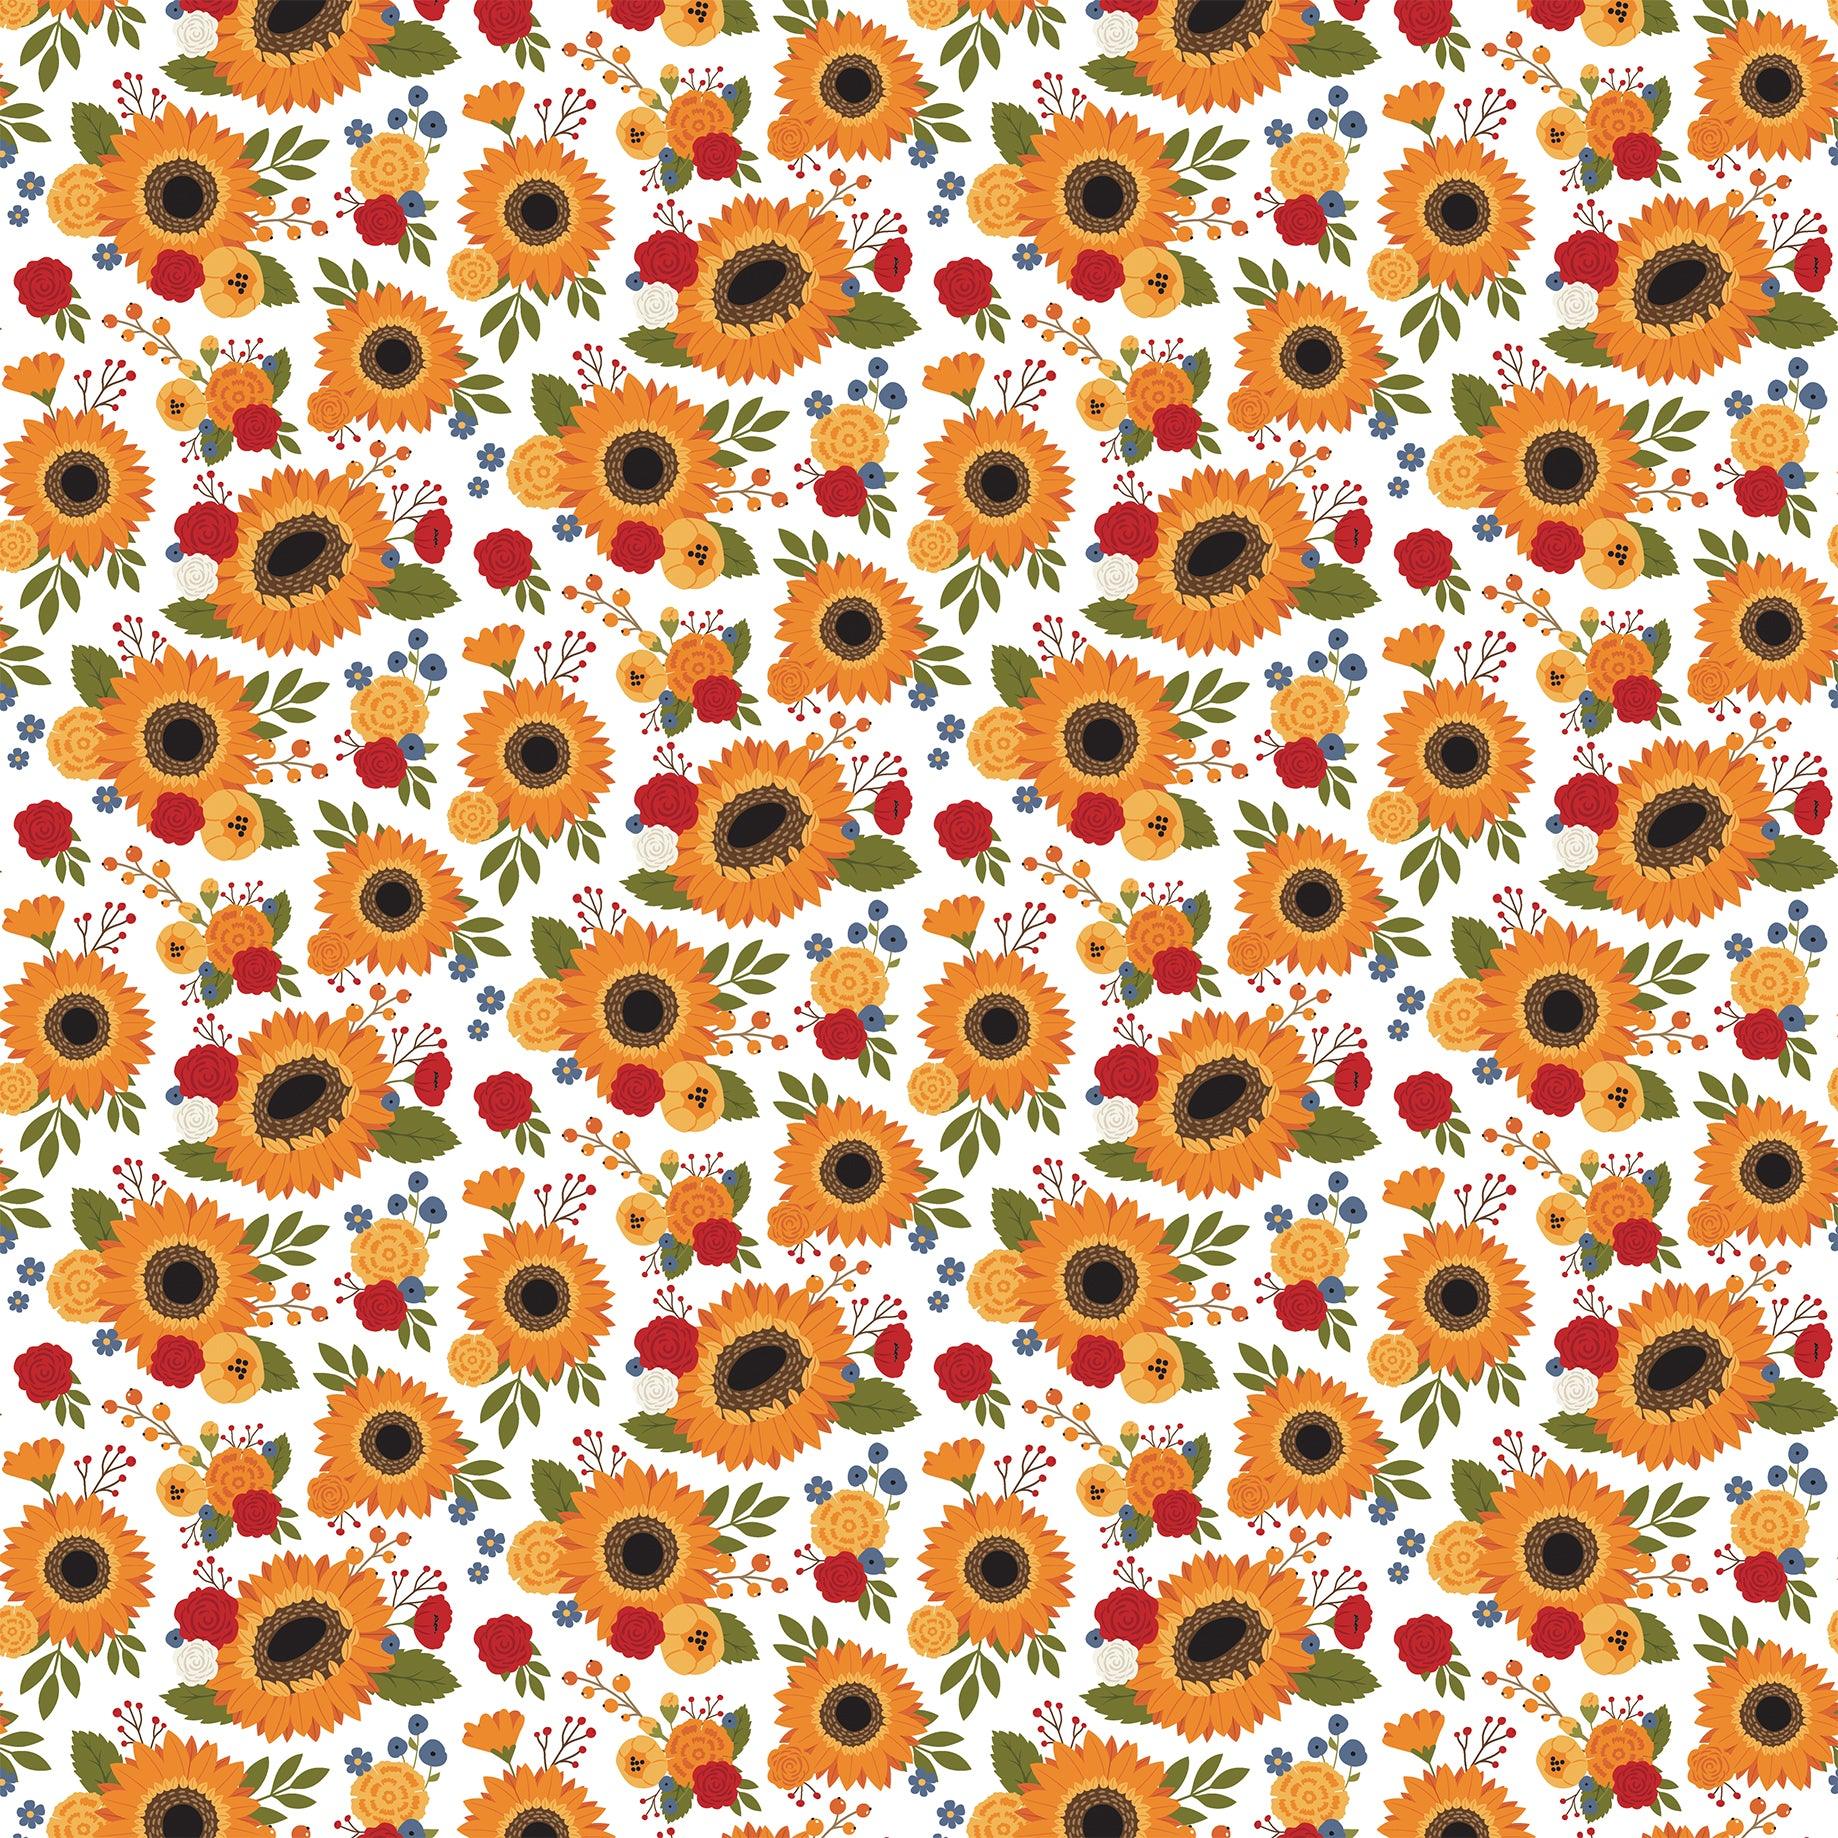 Fall Collection Family Farm Floral 12 x 12 Double-Sided Scrapbook Paper by Echo Park Paper - Scrapbook Supply Companies